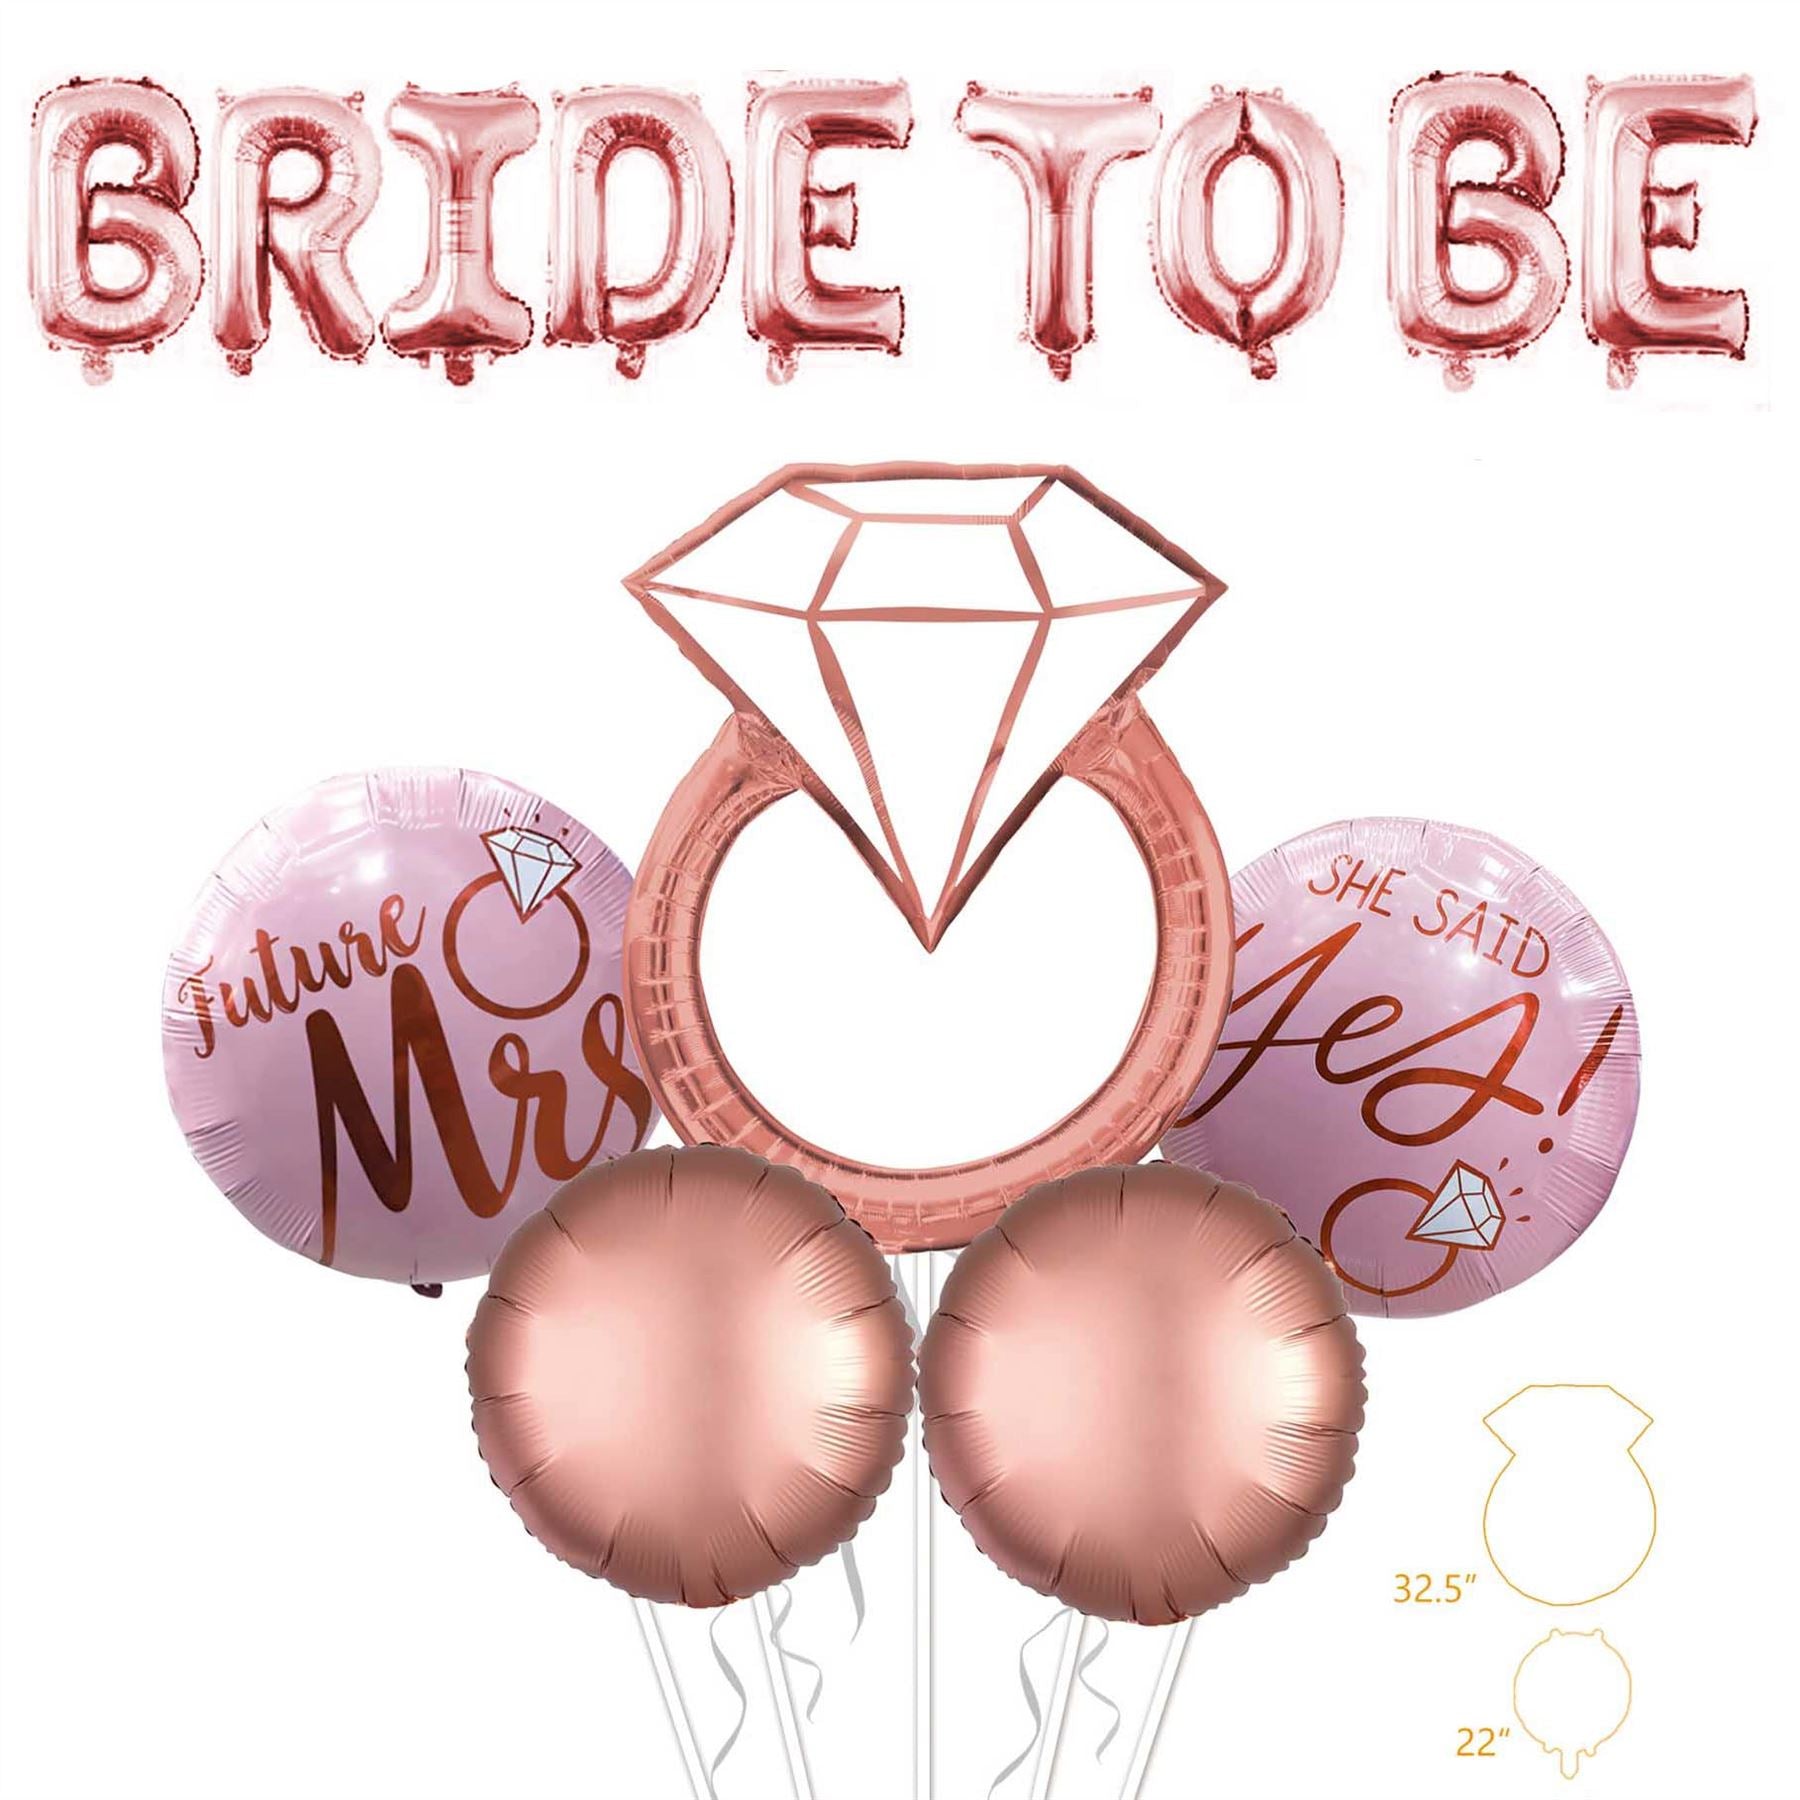 Sets of Premium Occasion Balloons - Rose Gold Engagement